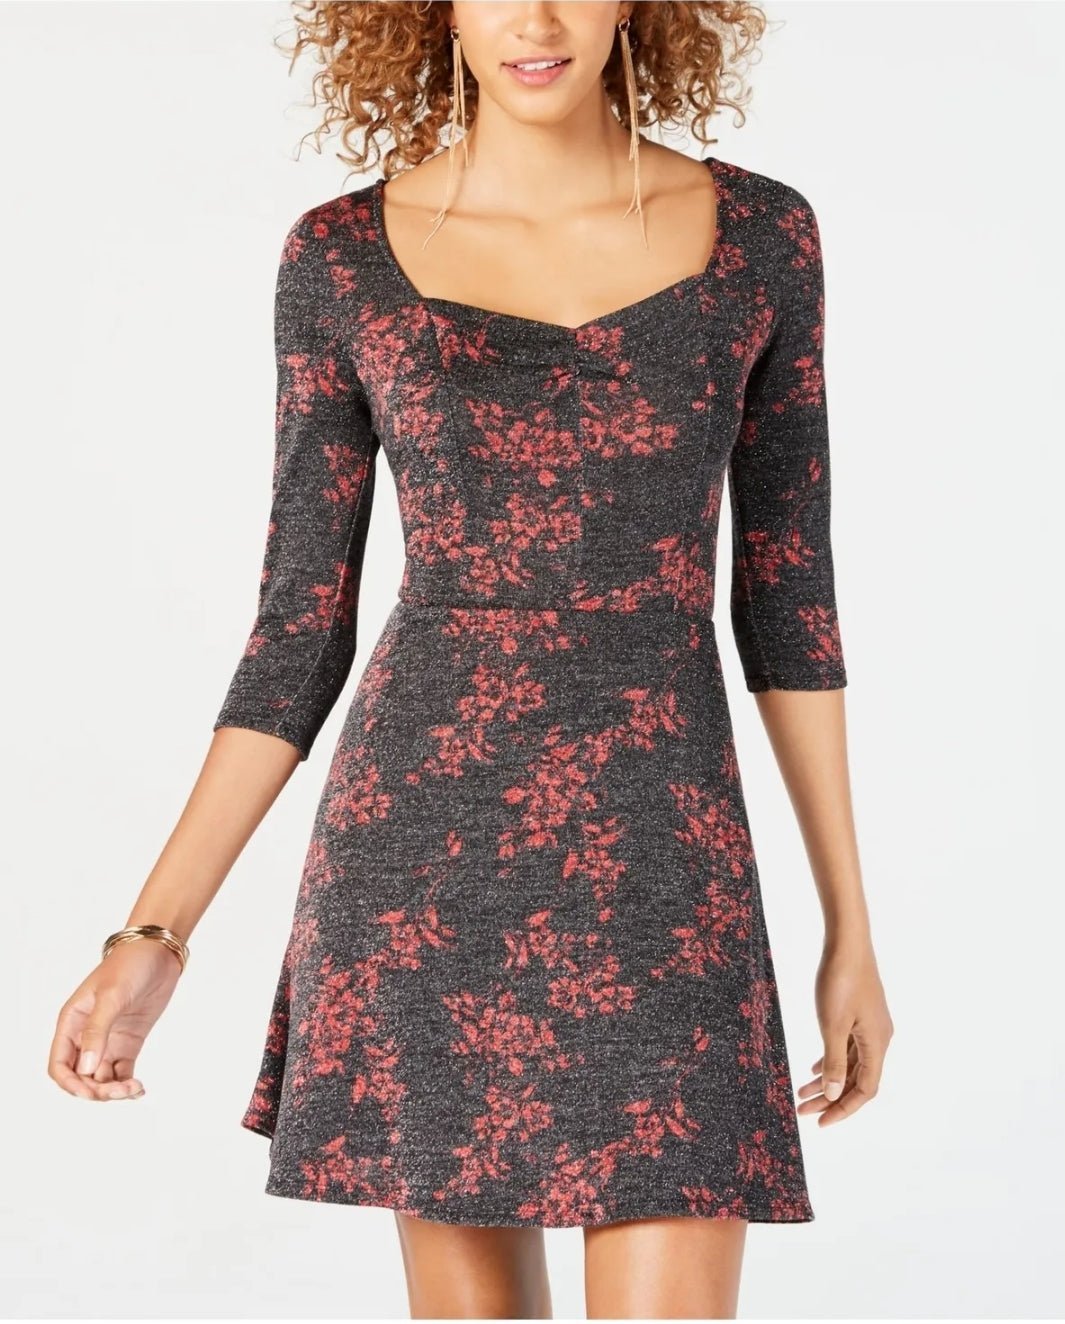 BE BOP Party Dress 3/4 Sleeve A Line Black Red Sparkly Floral Print NEW SMALL - BELLEZA'S - Vestidos - ZK08-5225